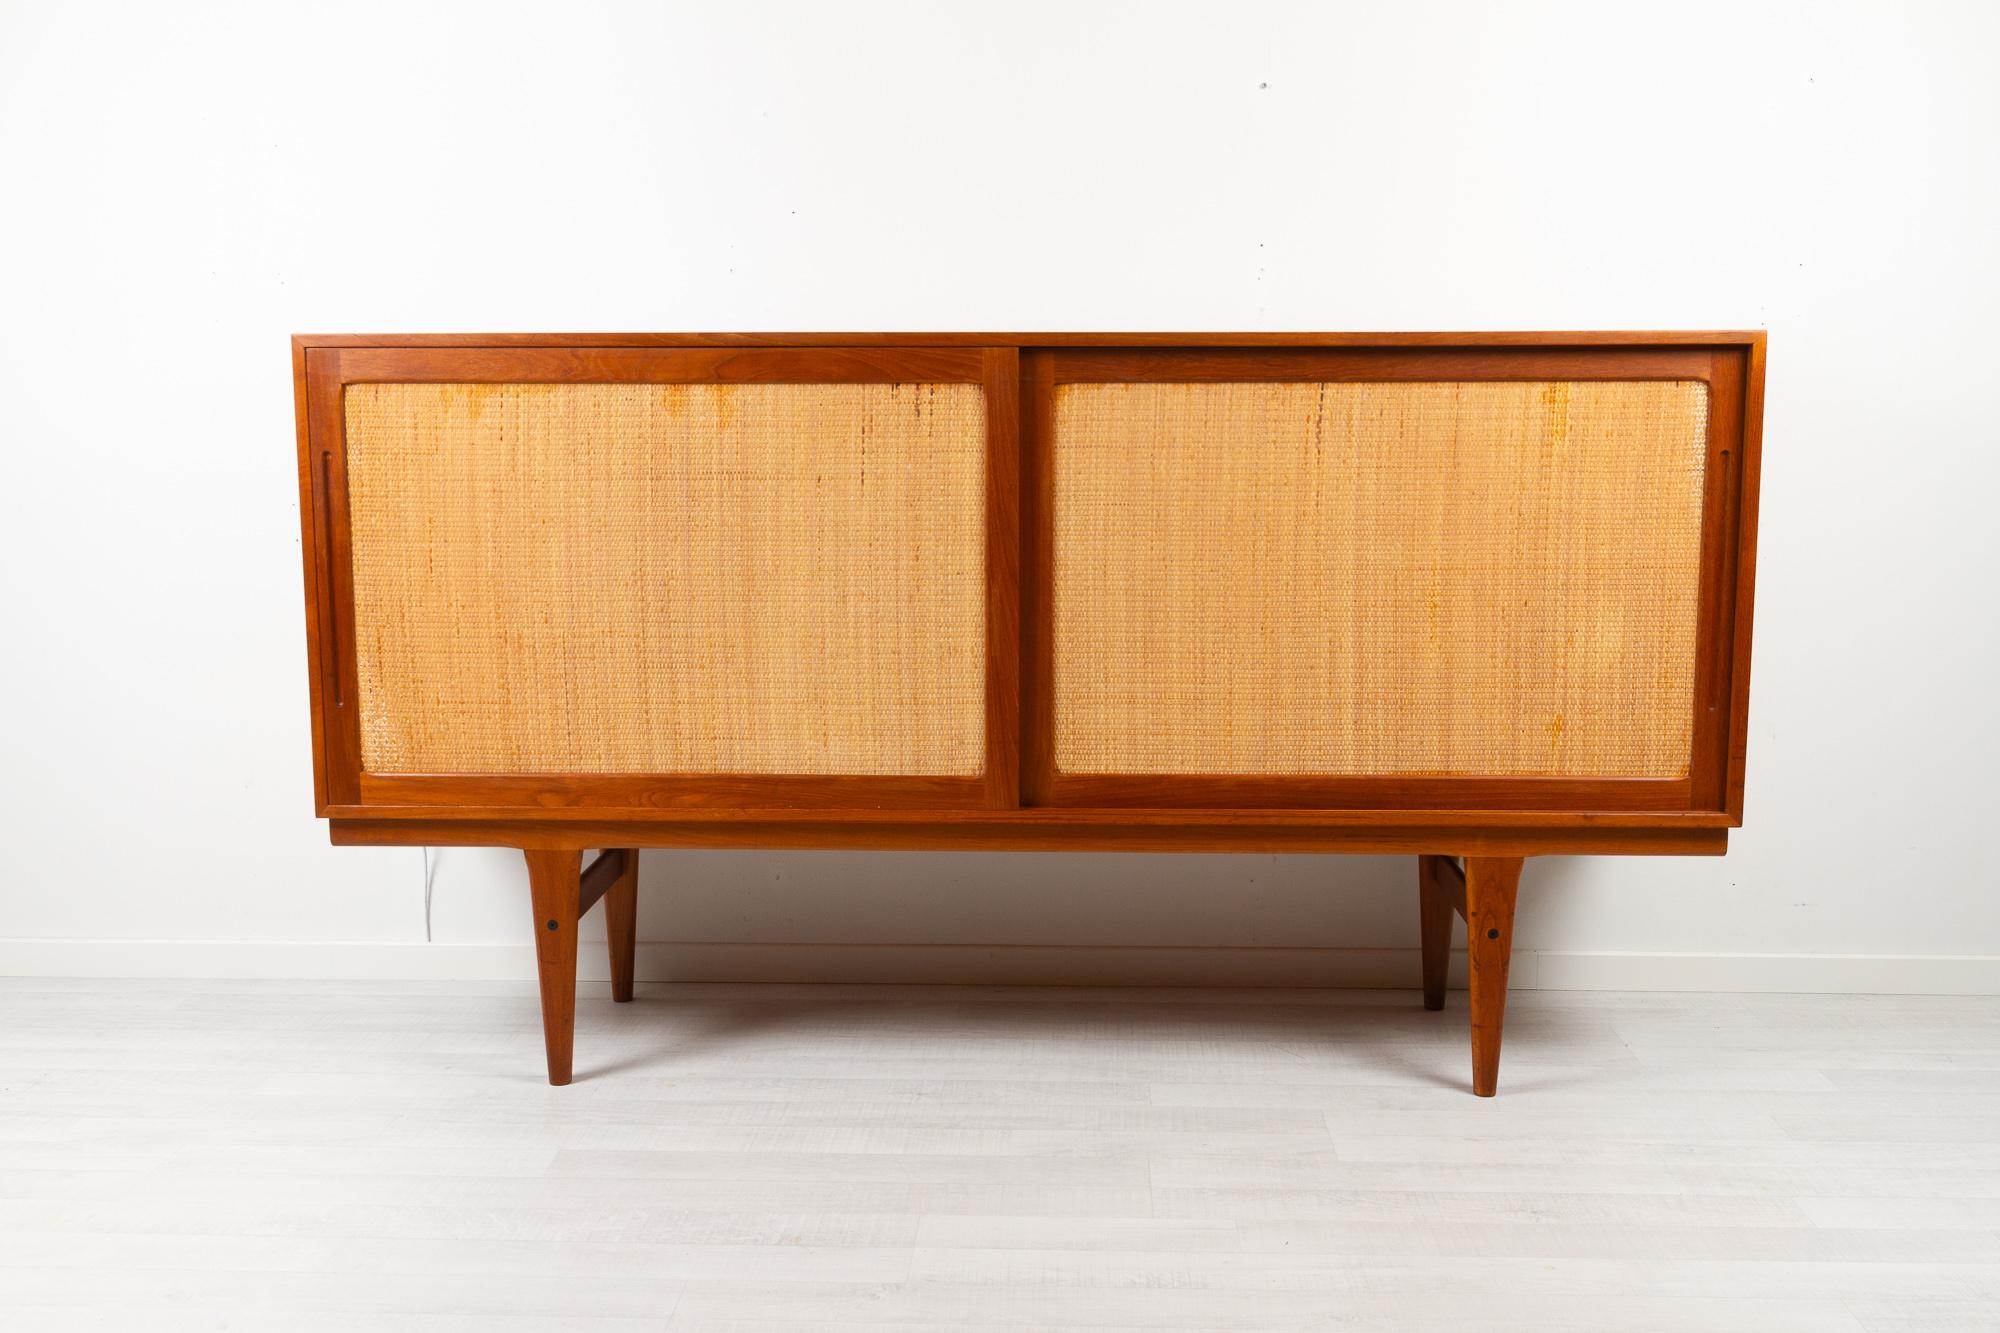 Vintage Danish Teak Sideboard by Georg Petersen 1960s
Early and rare mid-century Danish teak sideboard by Georg Petersen. Made in his own factory GP Farum in the early sixties.
Excellent build craftsmanship and beautiful accent in the woven cane